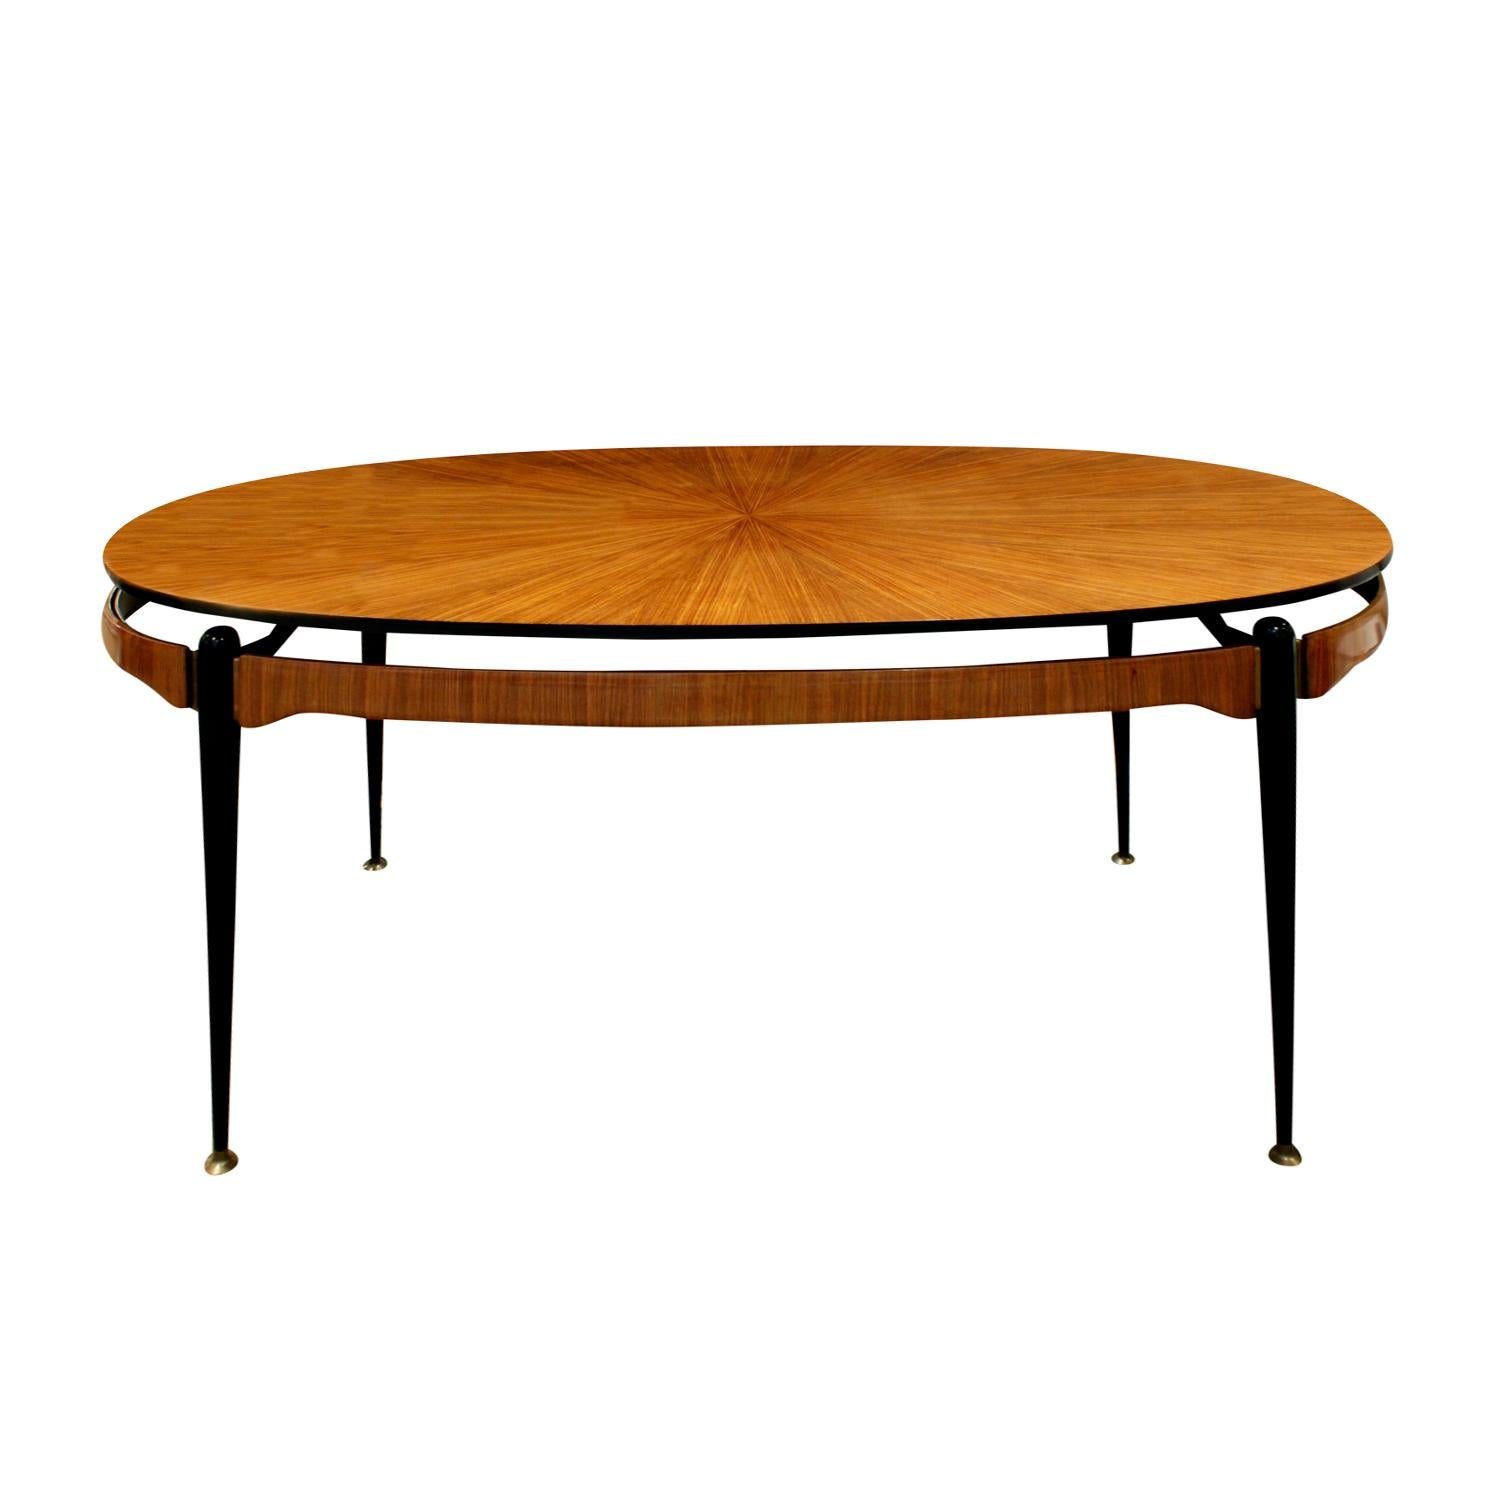 Beautiful Radiating Rosewood Dining Table, attributed to Ico Parisi, circa 1954